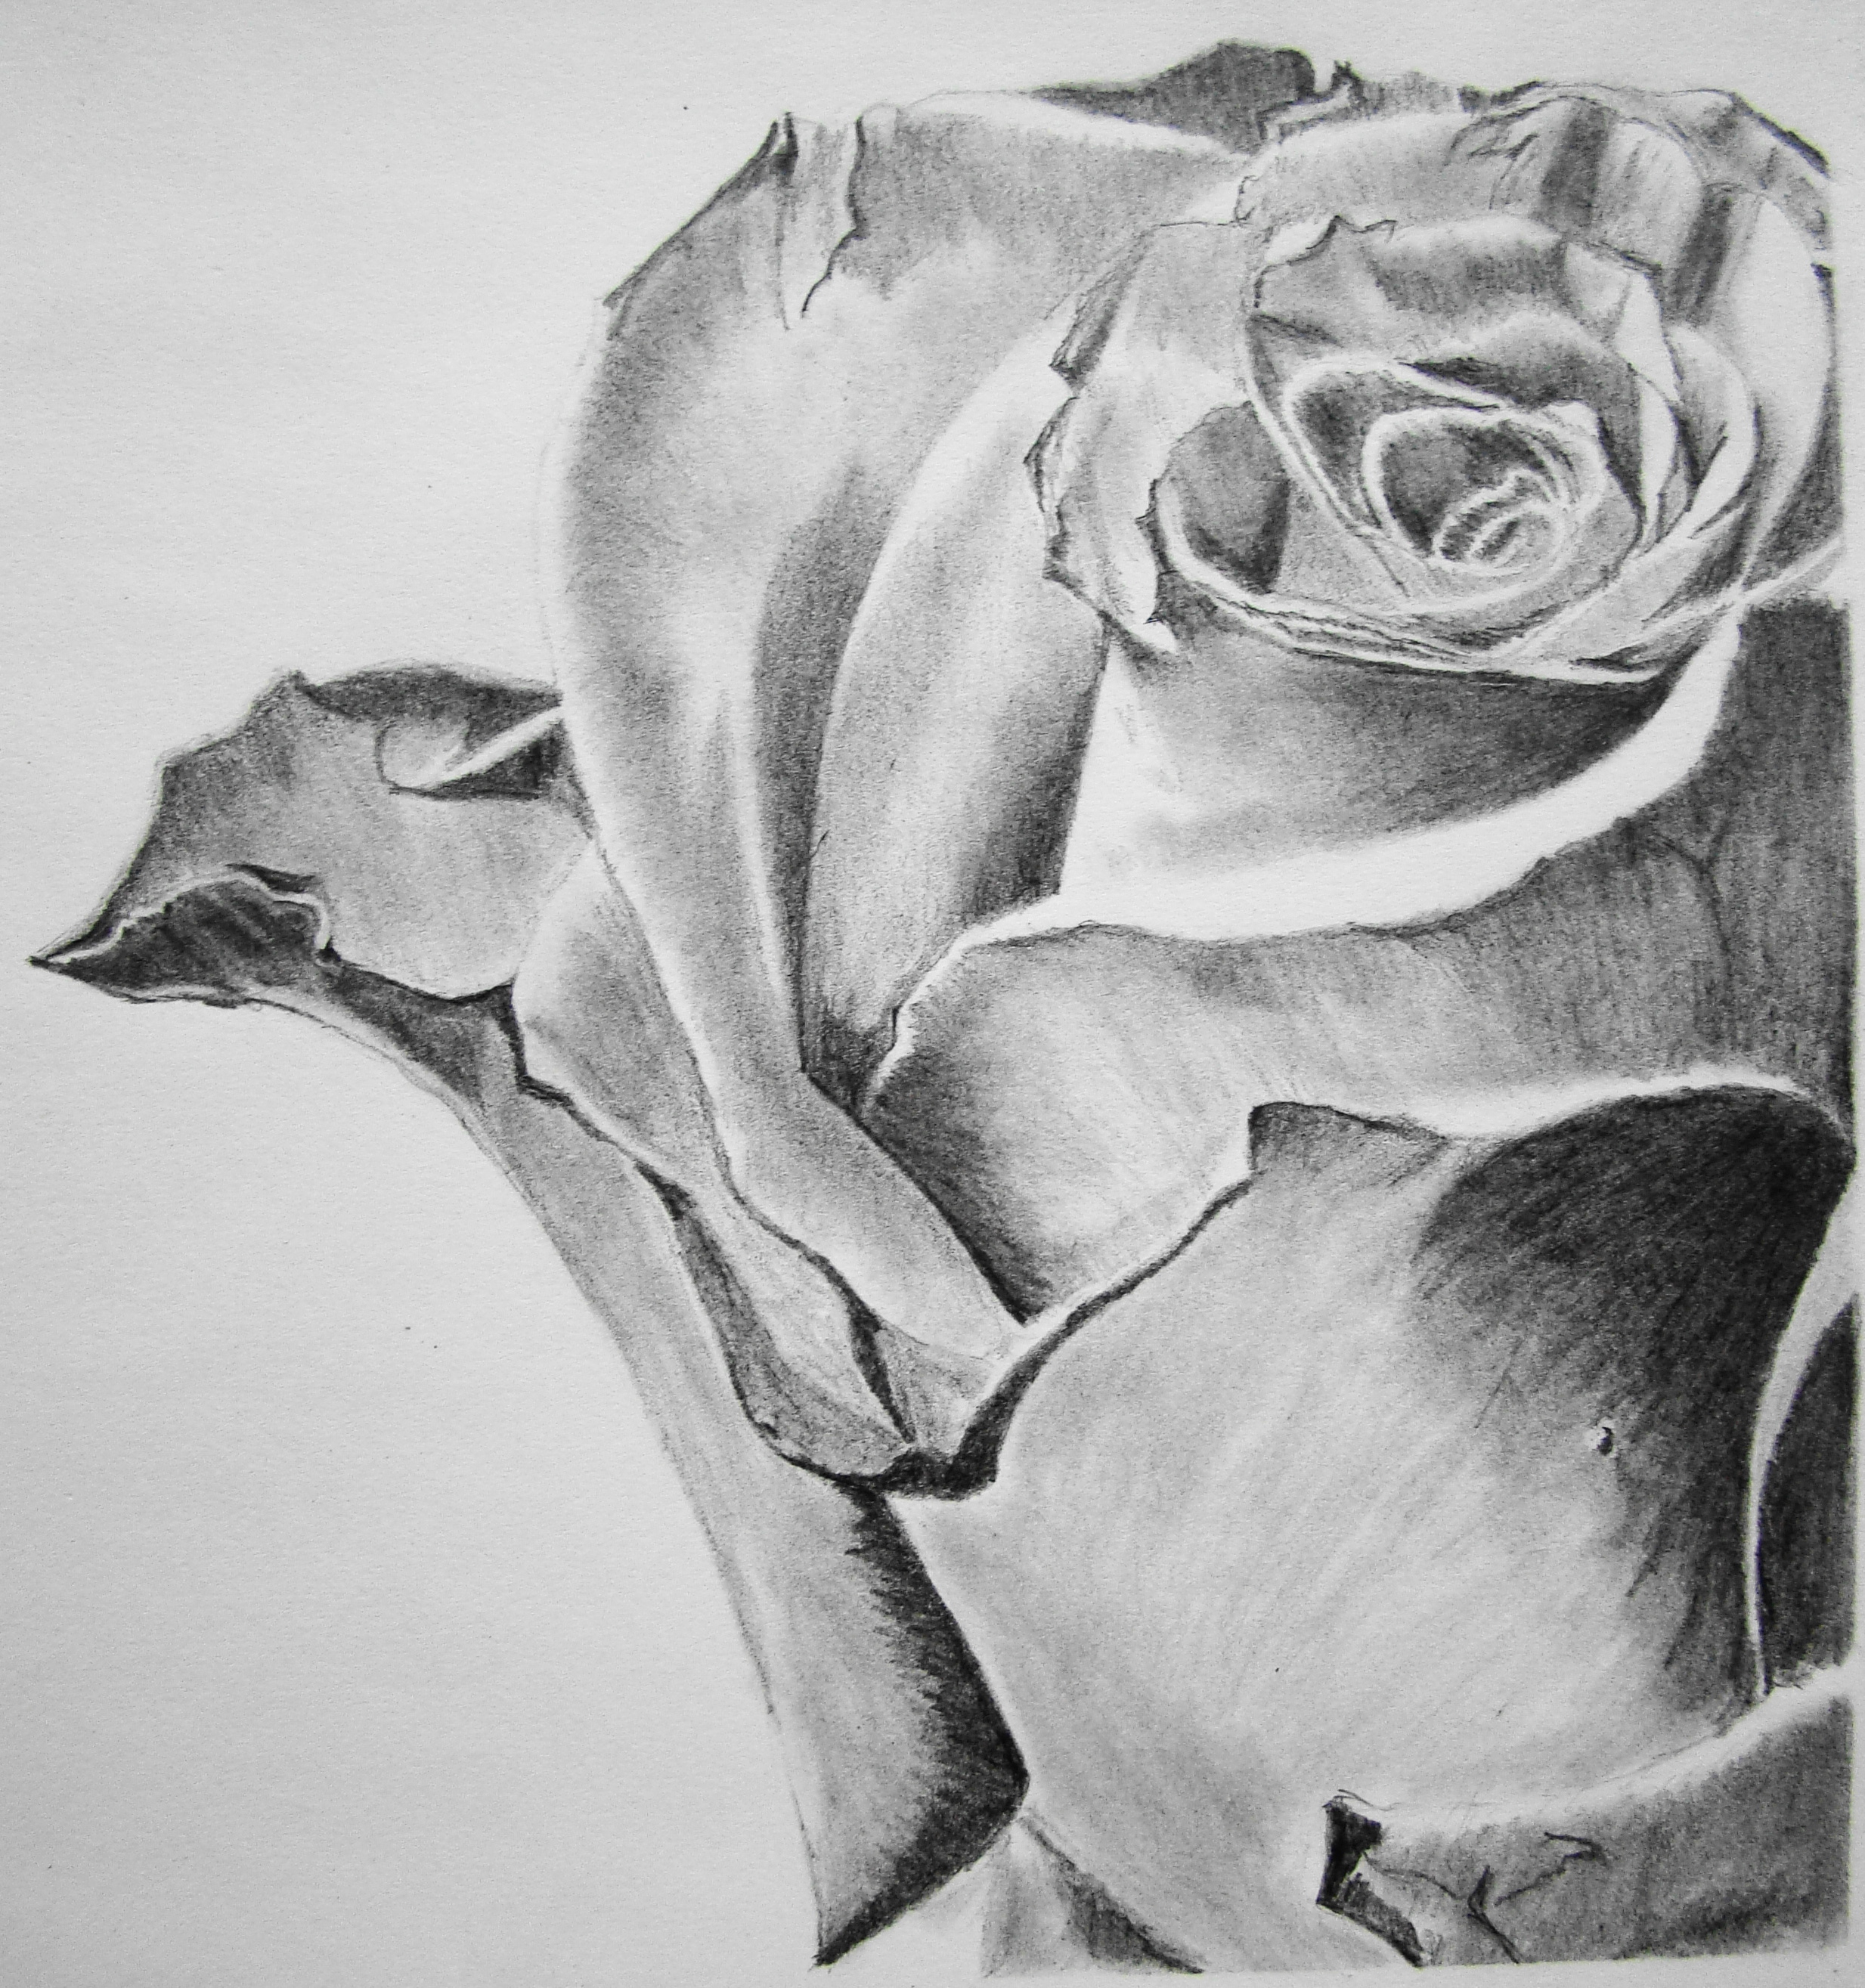 Pencil Drawings other on Pinterest Pencil Drawings